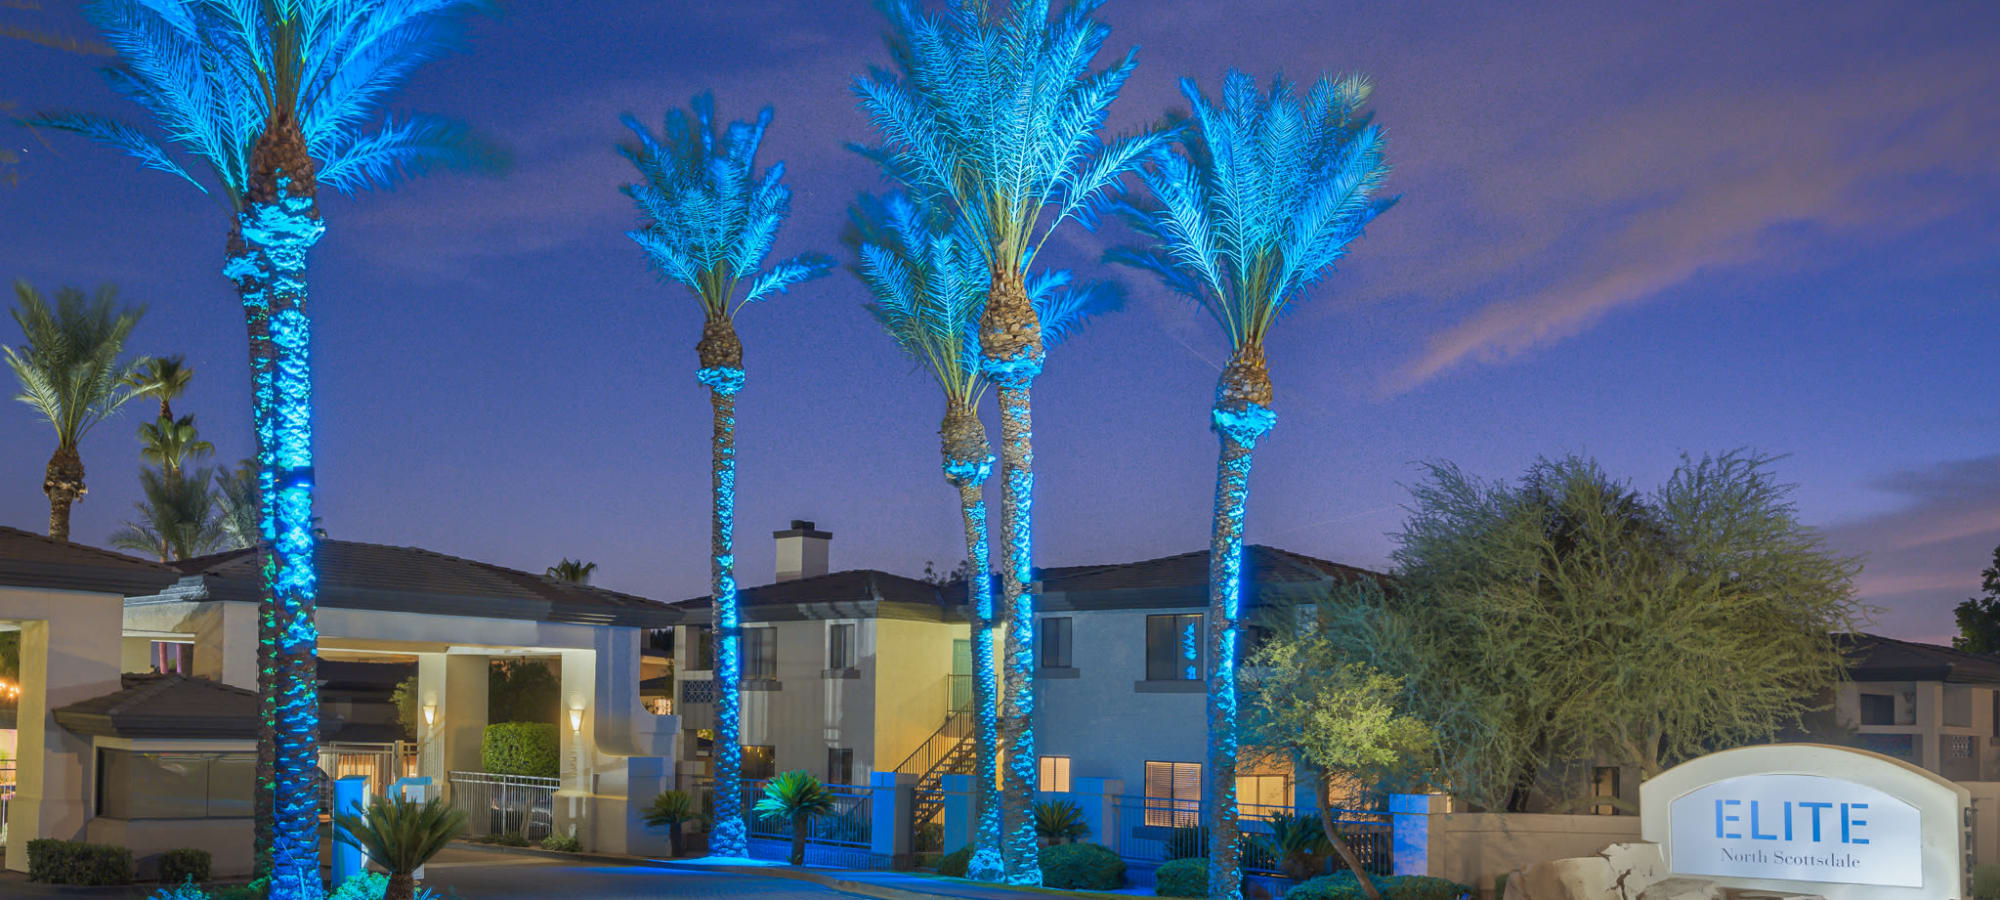 Cool lights on the palm trees at night in front of Elite North Scottsdale in Scottsdale, Arizona